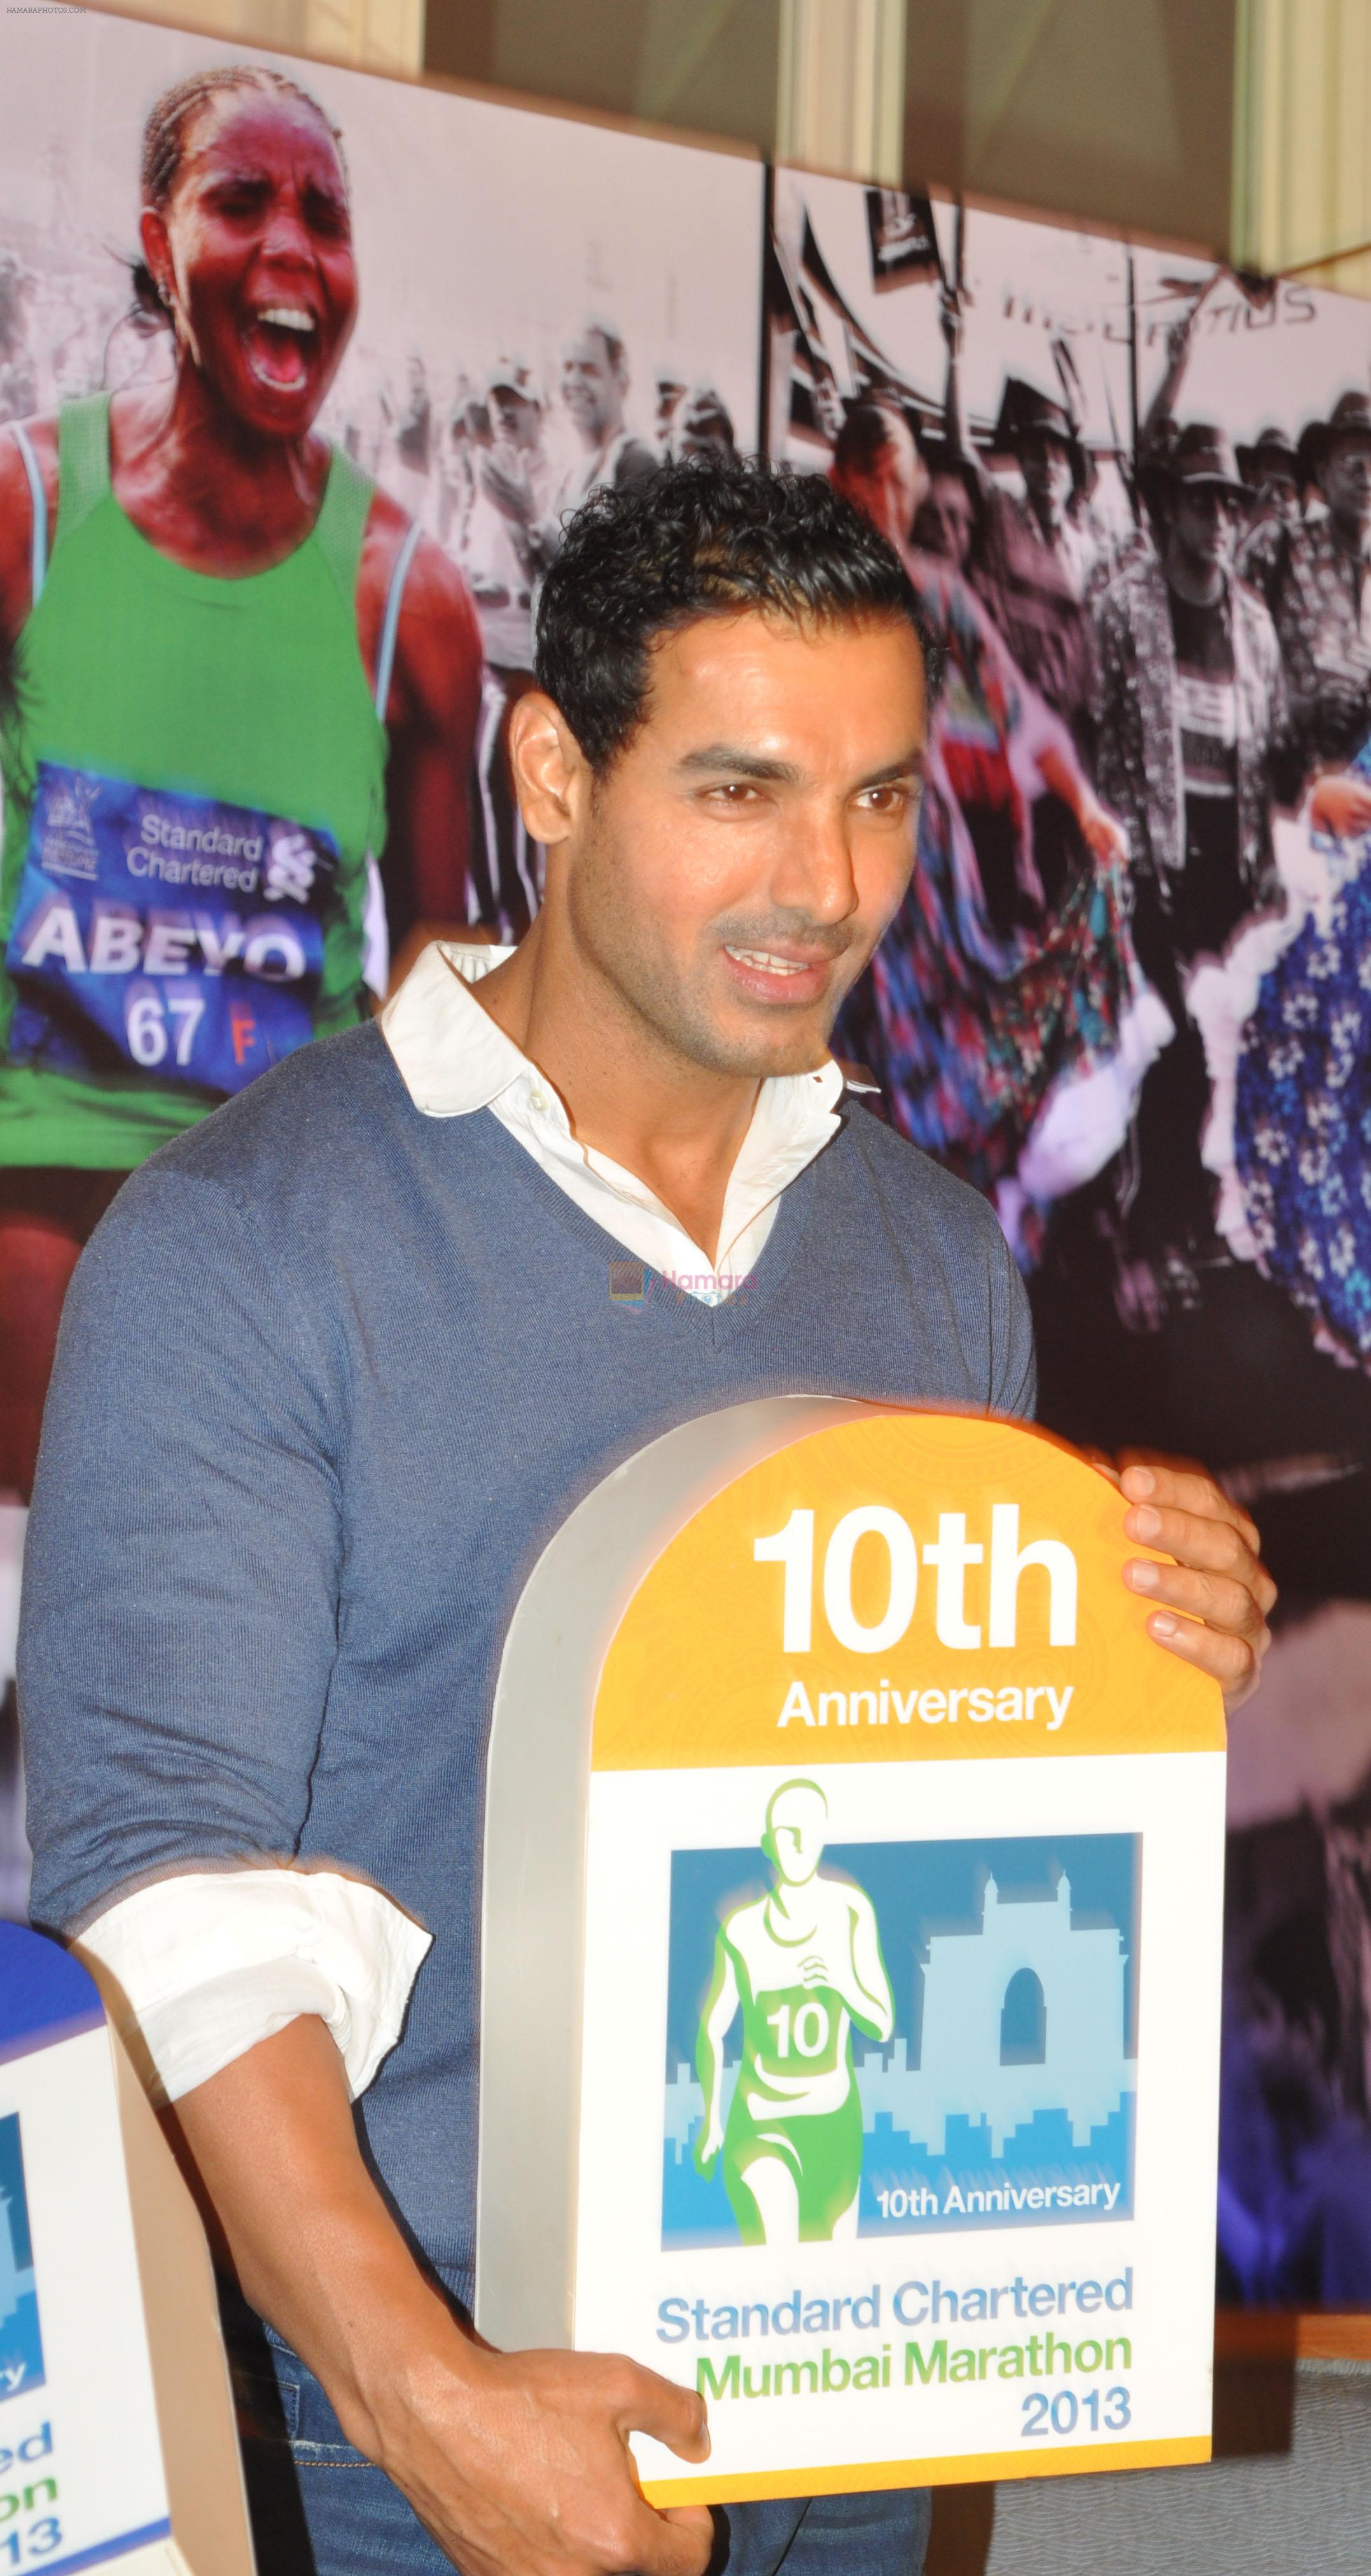 John Abraham at the press conference of the Tenth Standard Chartered Mumbai Marathon 2013 in Mumbai on 18th July 2012